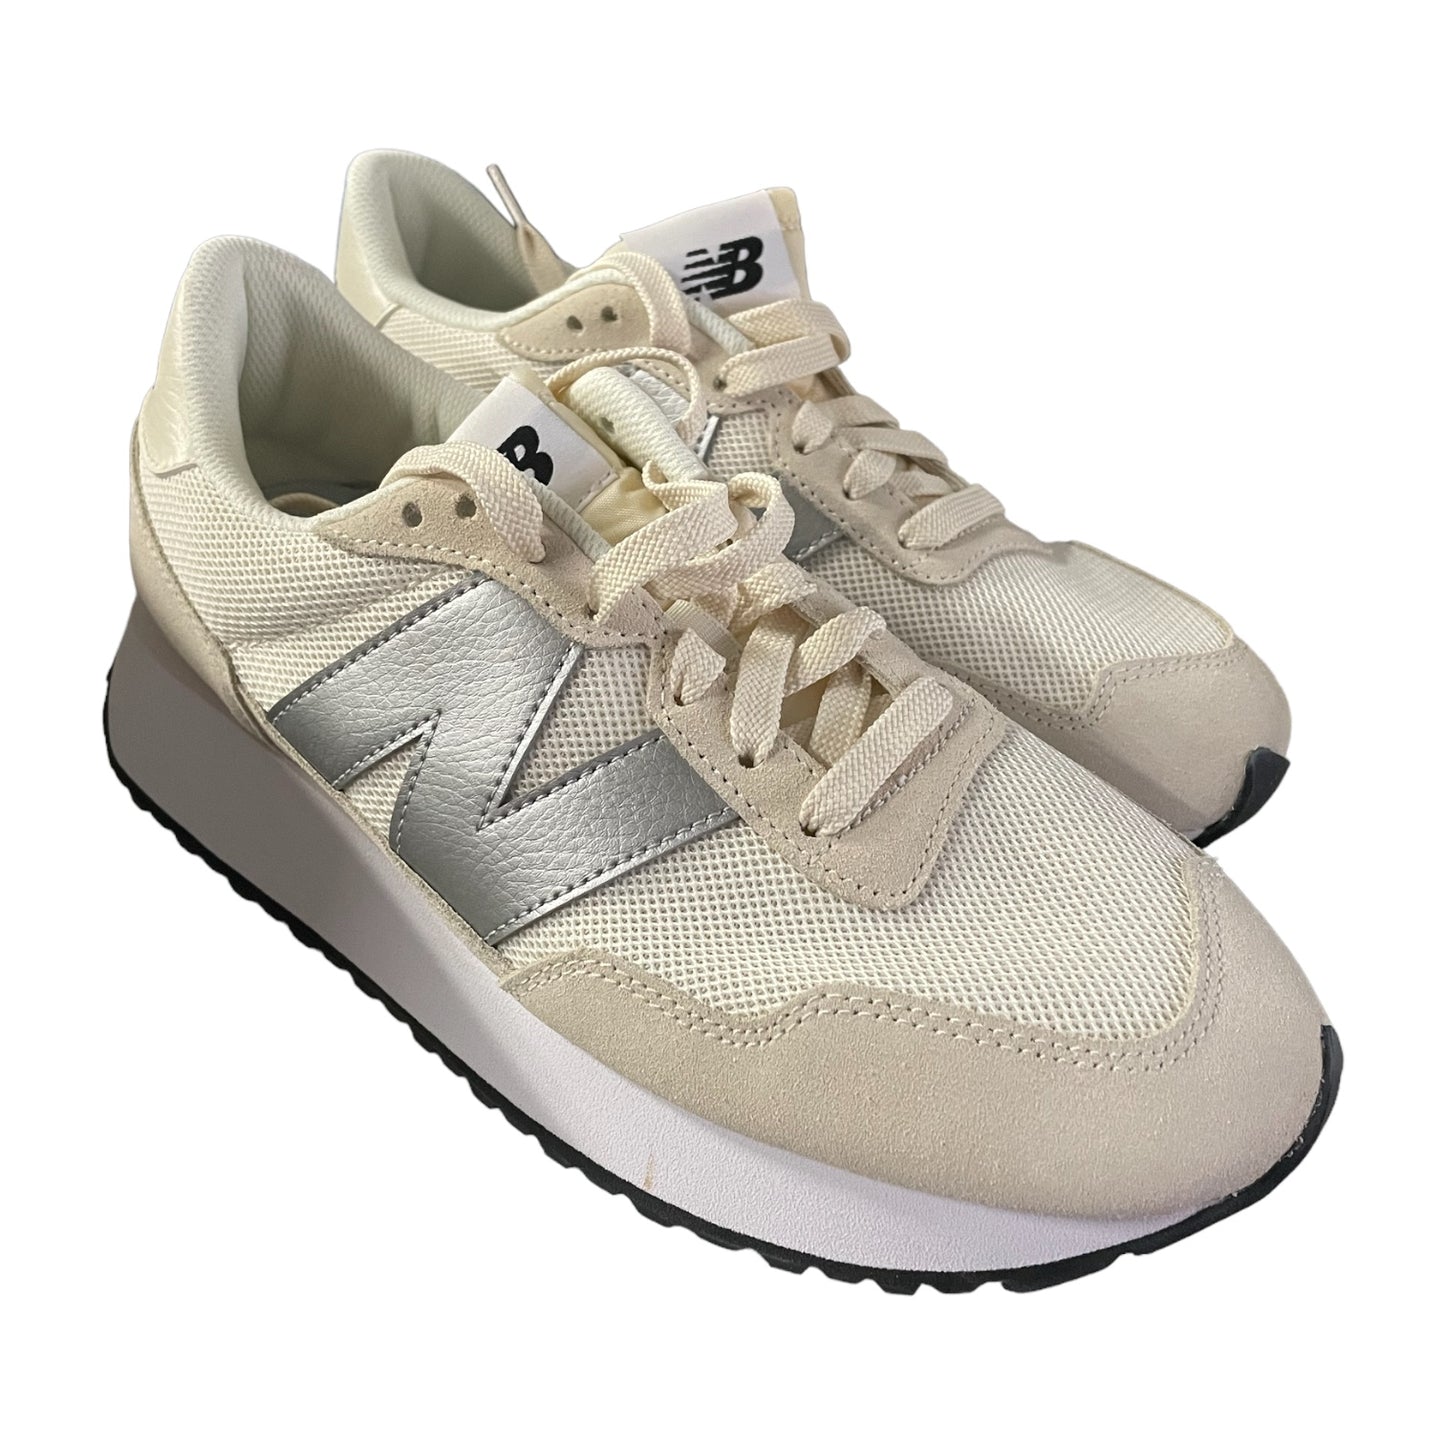 New Balance Women's 237 Suede Upper Casual Retro Lace-Up Sneakers